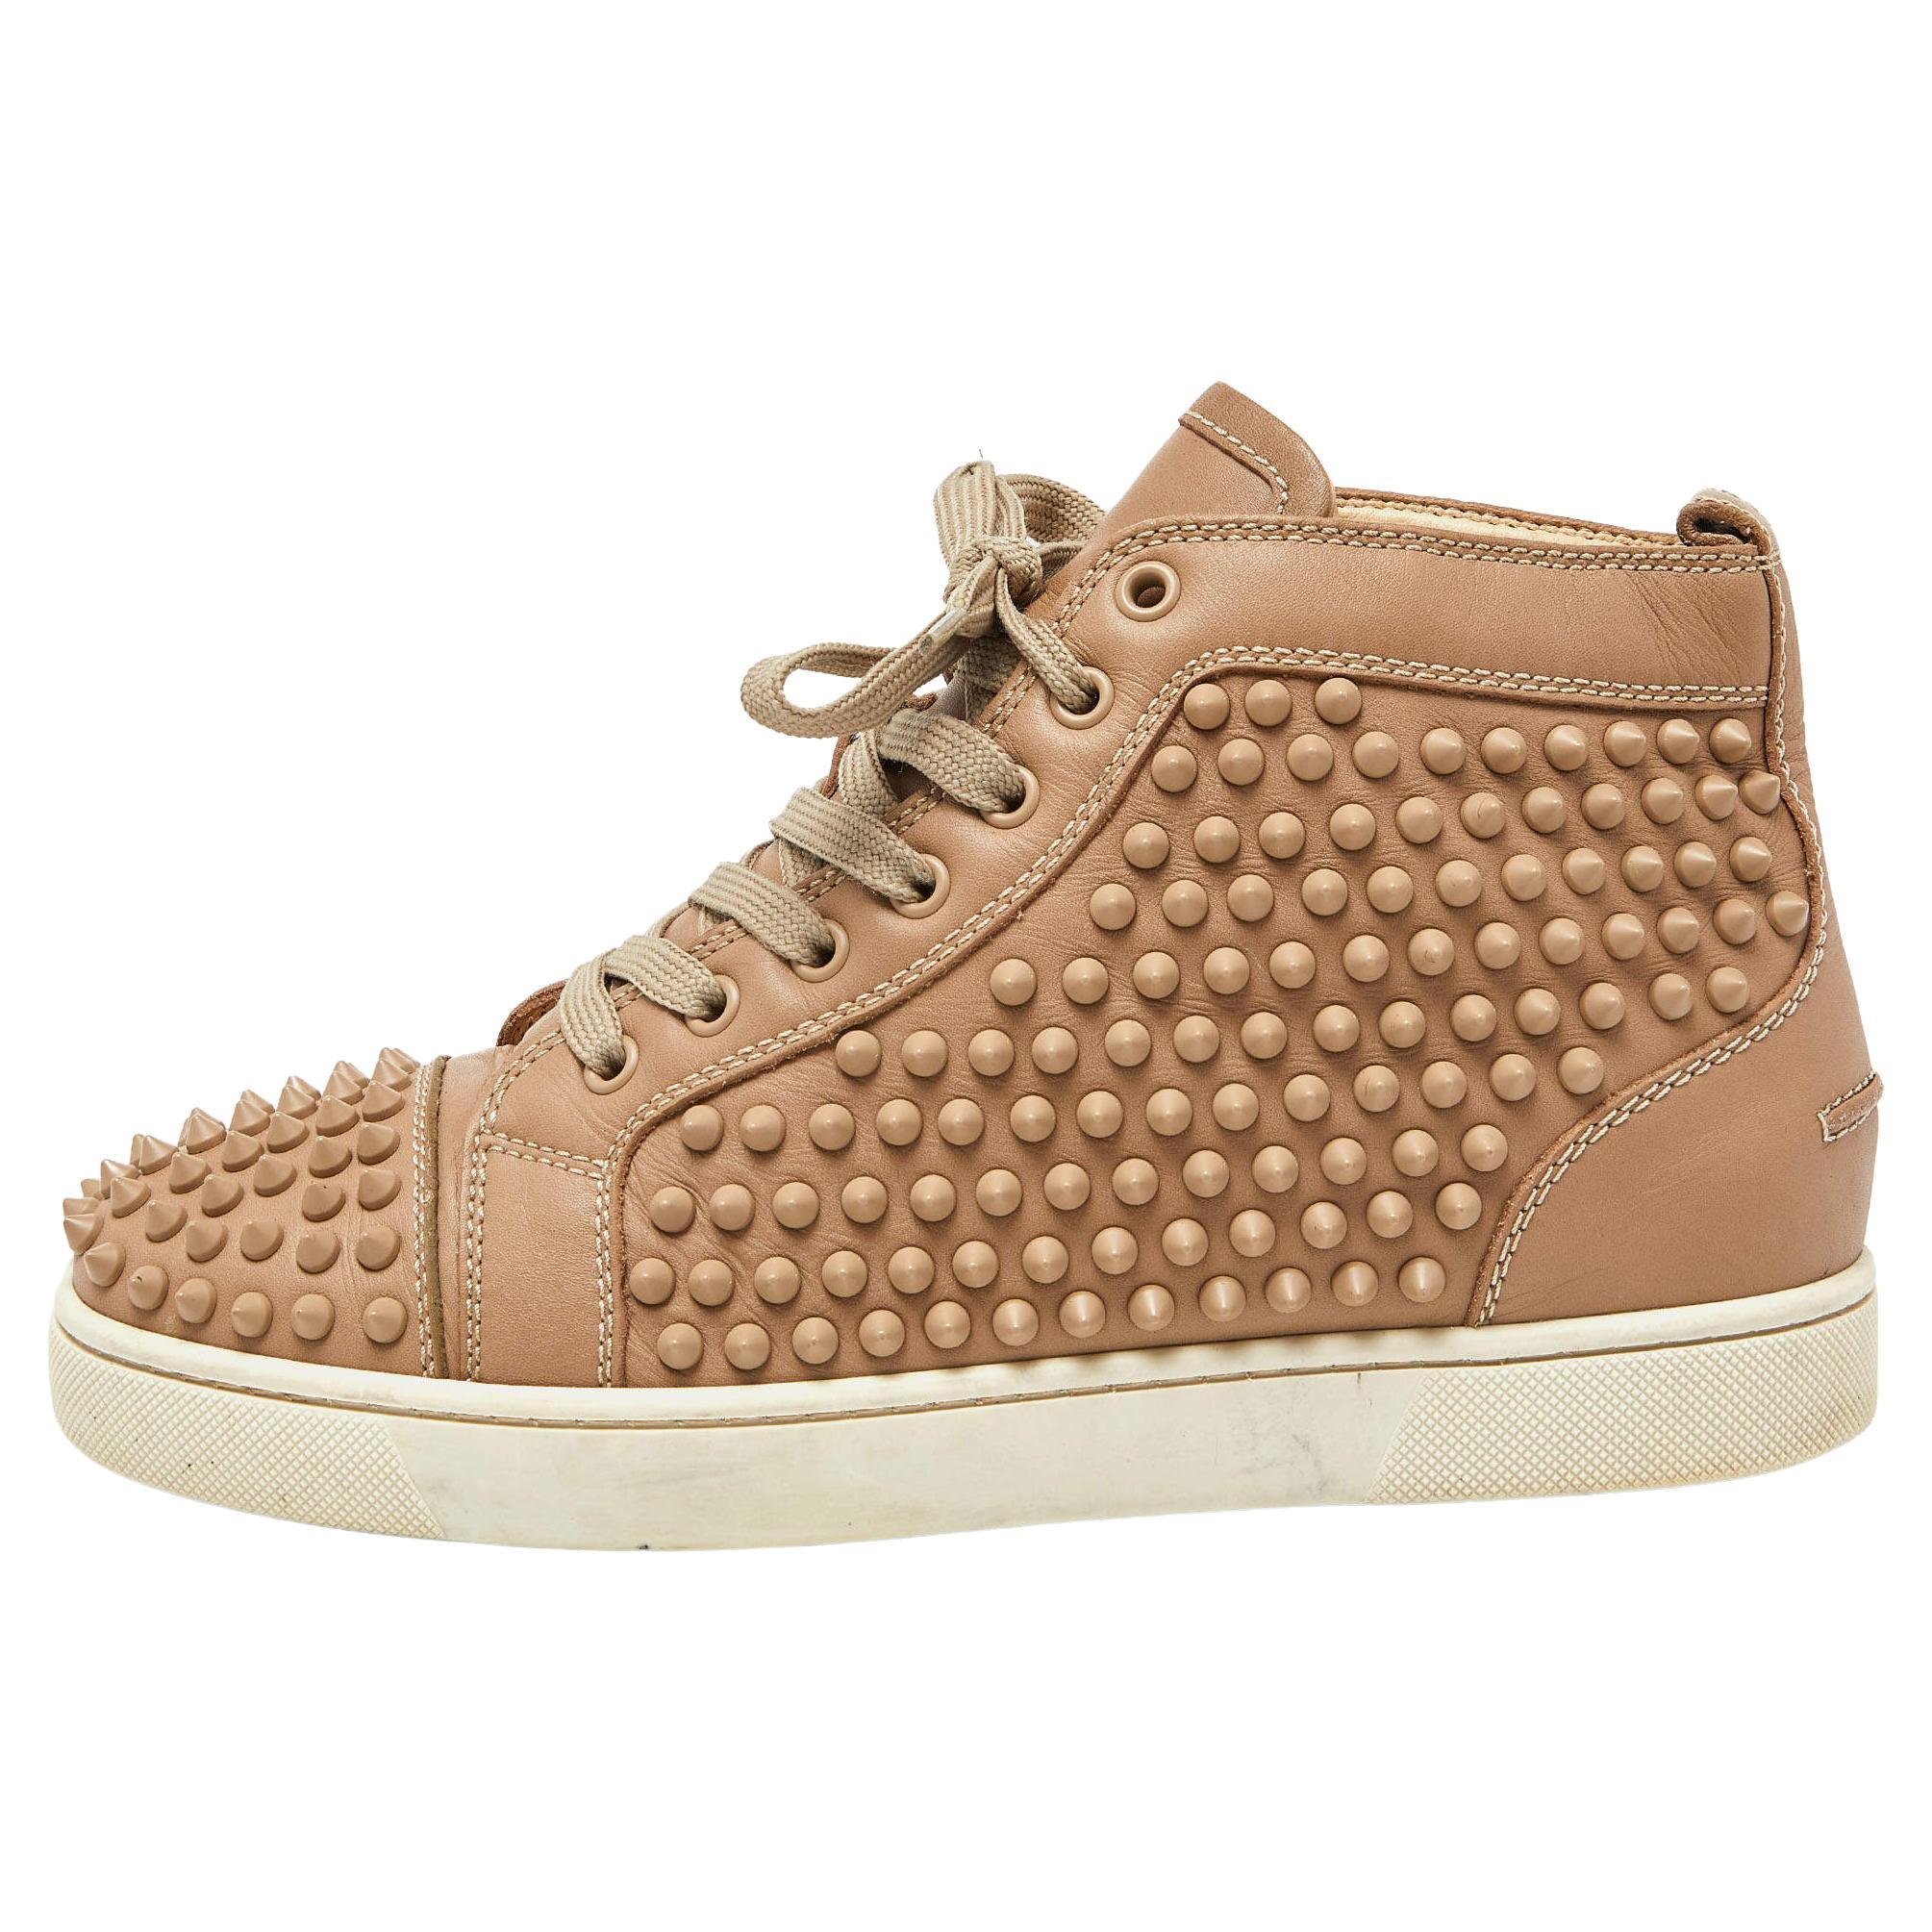 Christian Louboutin Beige Leather Louis Spike High Top Sneakers Size 39.5 For Sale